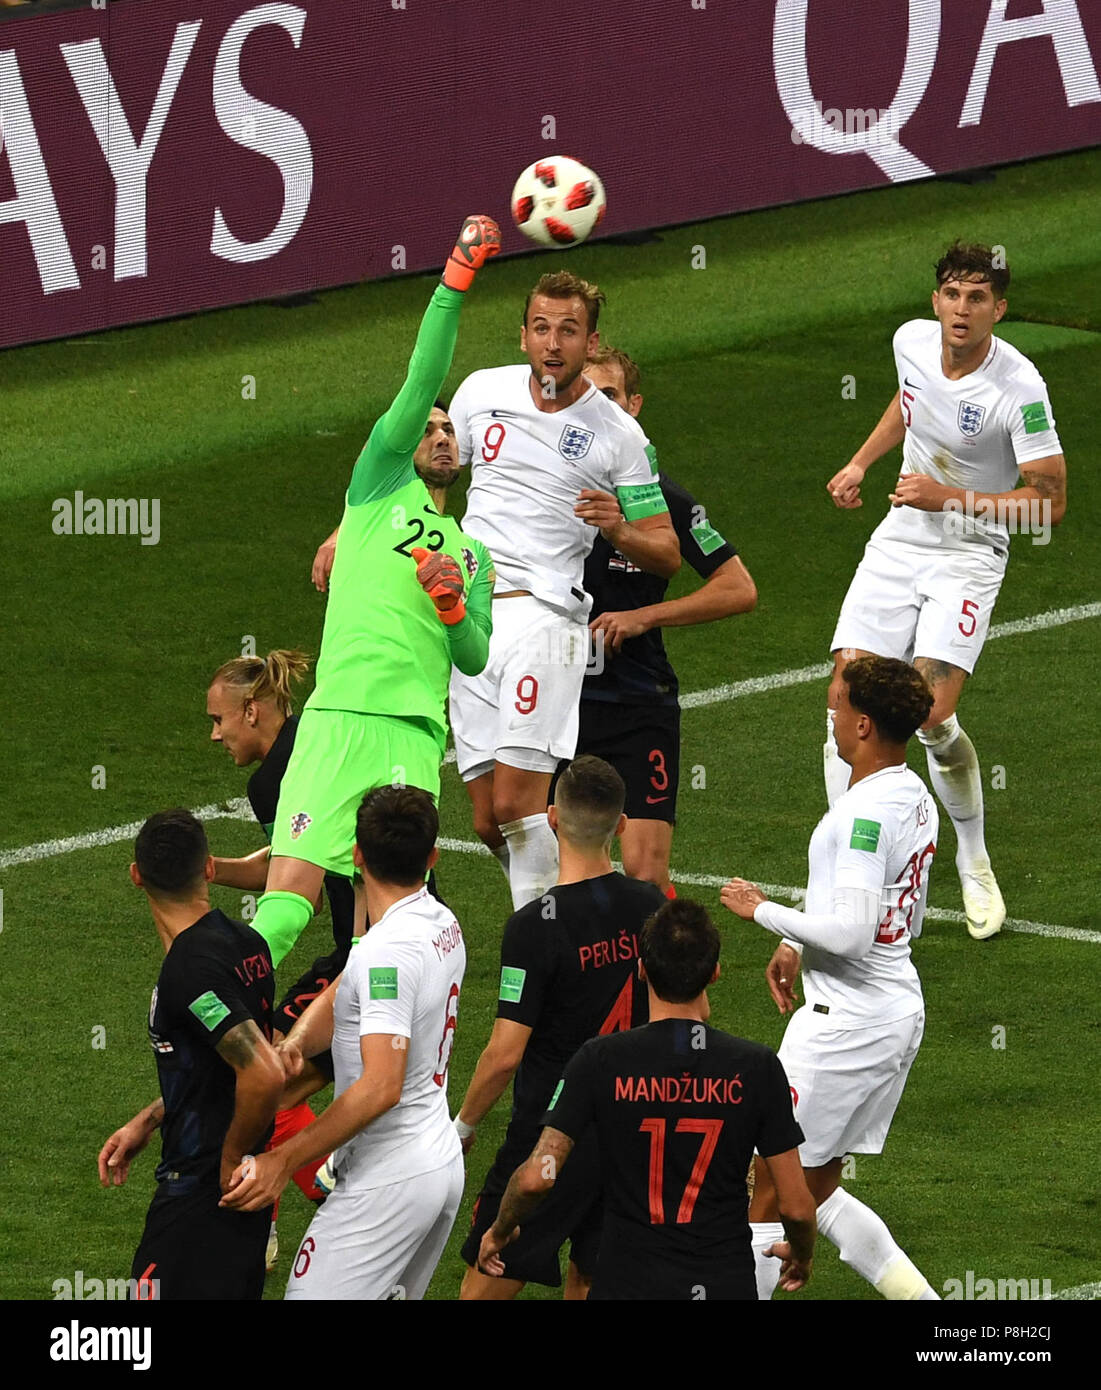 Moscow, Russia. 11th July, 2018. Goalkeeper Danijel Subasic (1st L, top) of Croatia defends during the 2018 FIFA World Cup semi-final match between England and Croatia in Moscow, Russia, July 11, 2018. Credit: Wang Yuguo/Xinhua/Alamy Live News Stock Photo